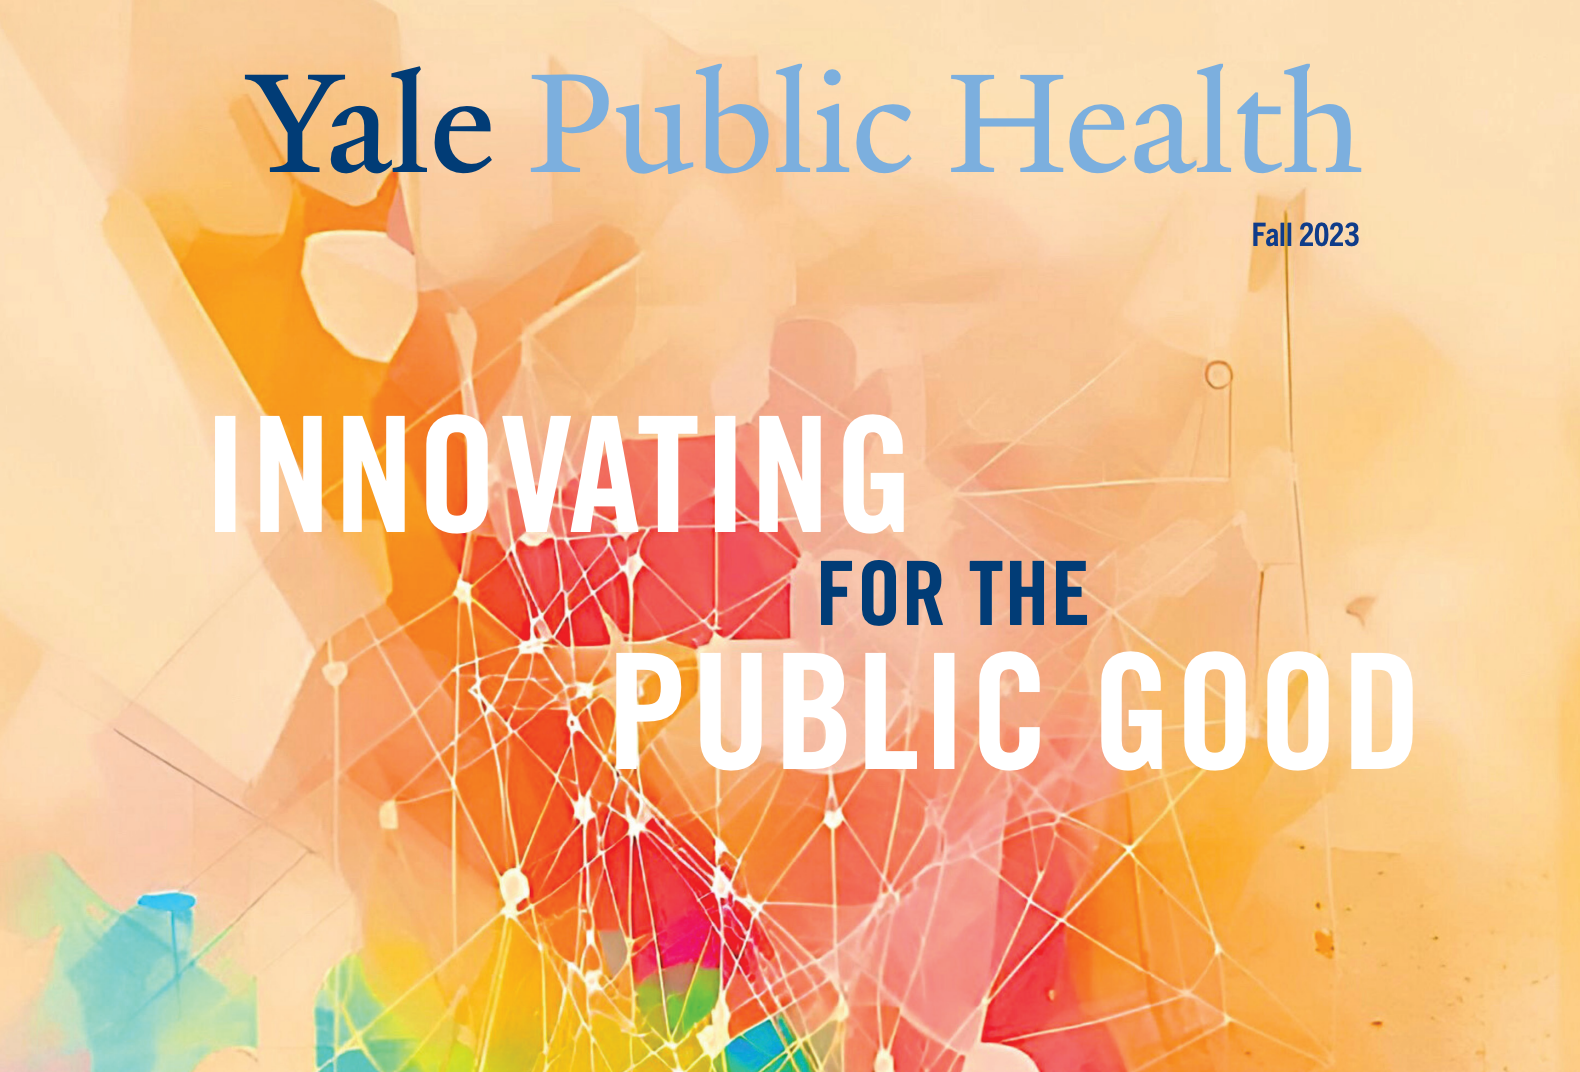 Innovating for the Public Good